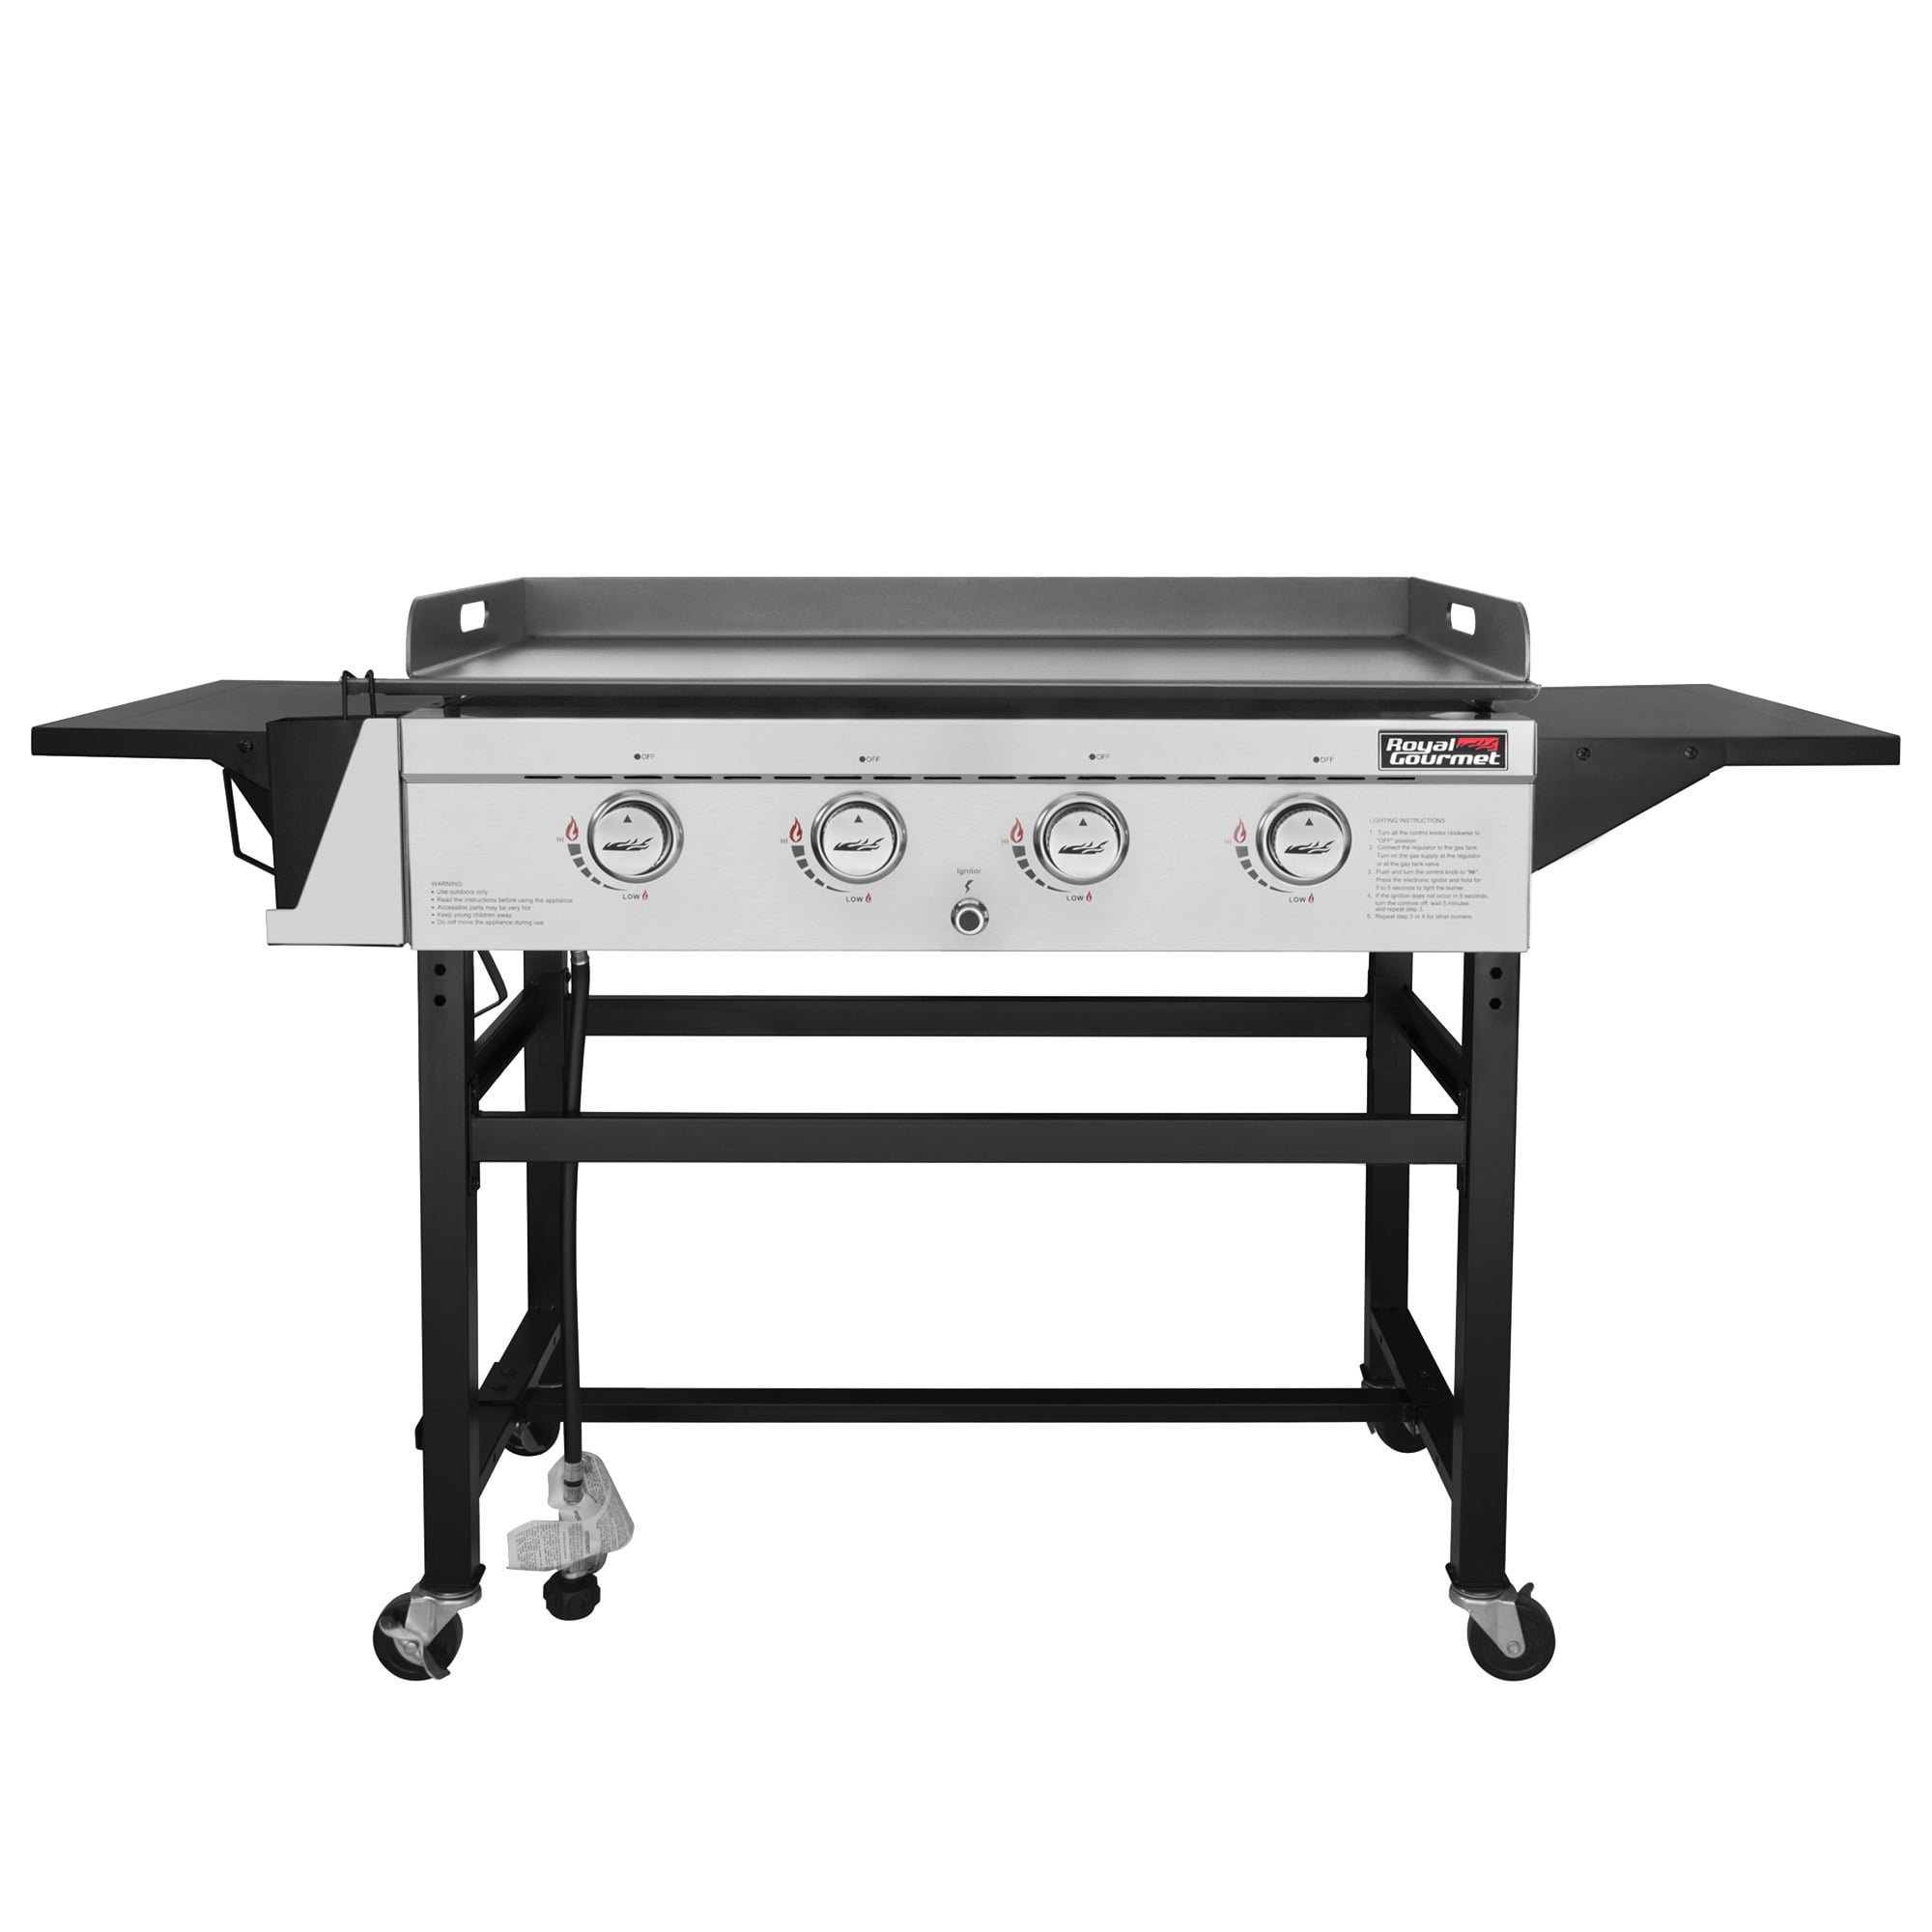 52000 Btu Propane Gas Grill Griddle, Outdoor Gourmet 6 Burner Stainless Steel Propane Griddle Reviews